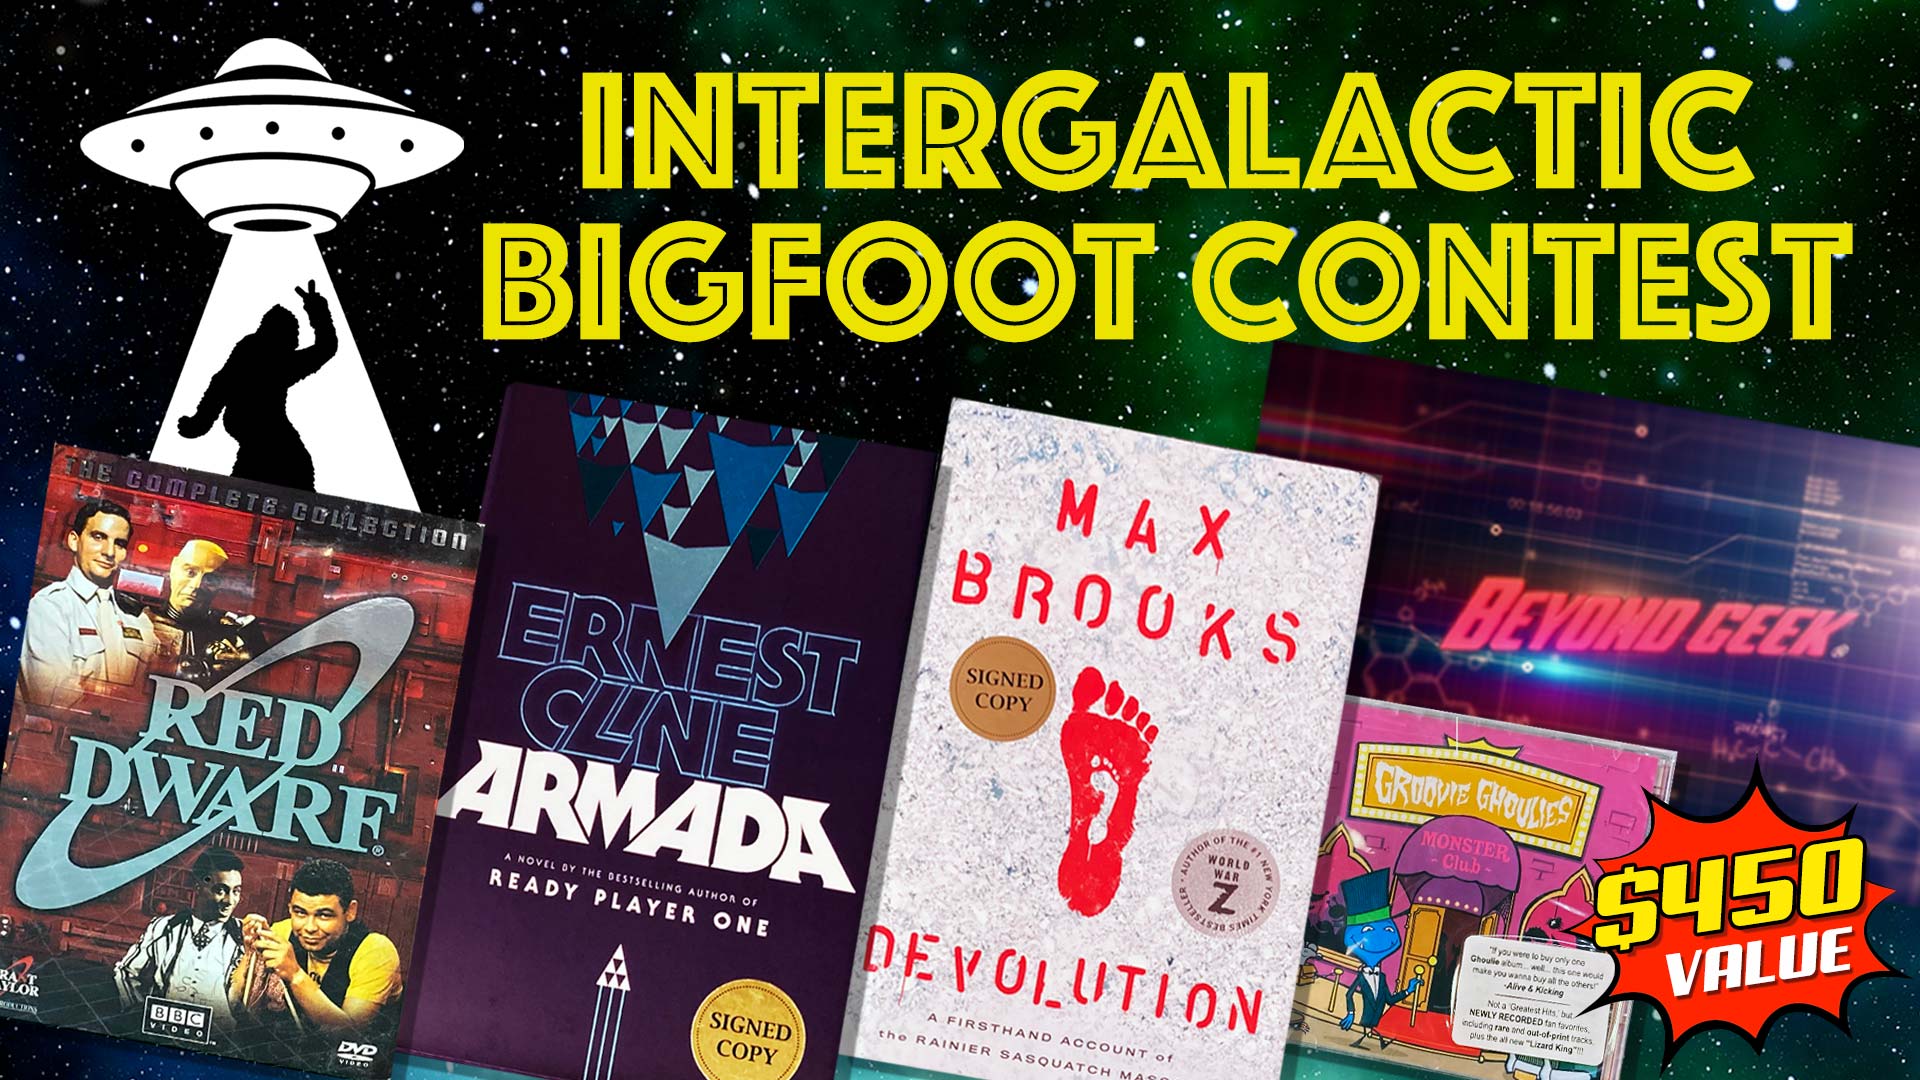 Image of UFO beaming up Bigfoot, Red Dwarf DVD box, Armada Book by Ernest Cline, Devolution book by Max Brooks, Groovie Ghoulies CD, and Beyond Geek logo in front of a starfield. Text: Intergalactic Bigfoot Contest. Text: $450 Value